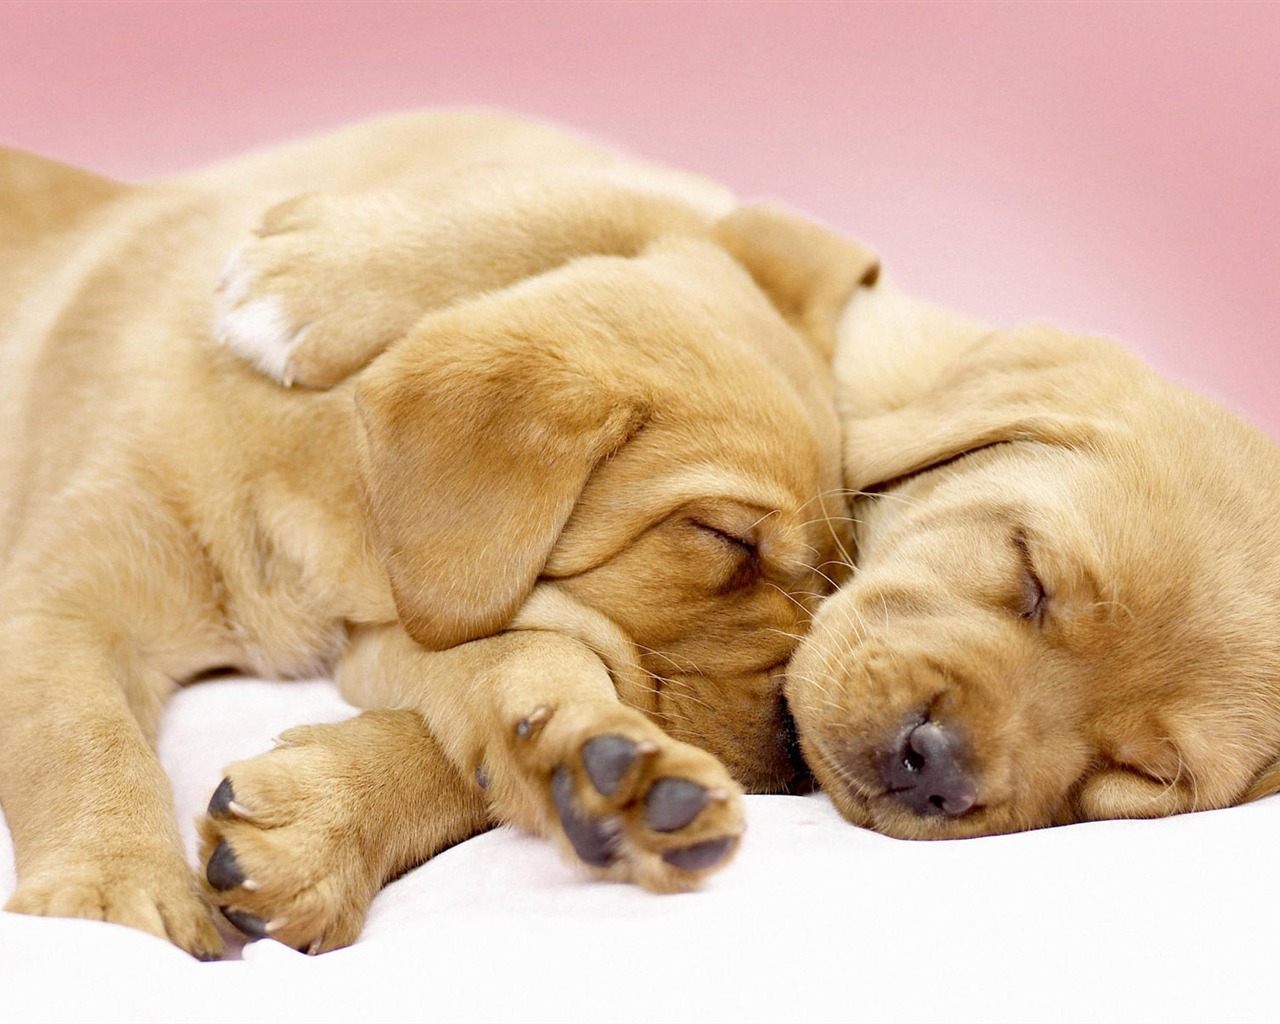 Puppy Photo HD wallpapers (7) #1 - 1280x1024